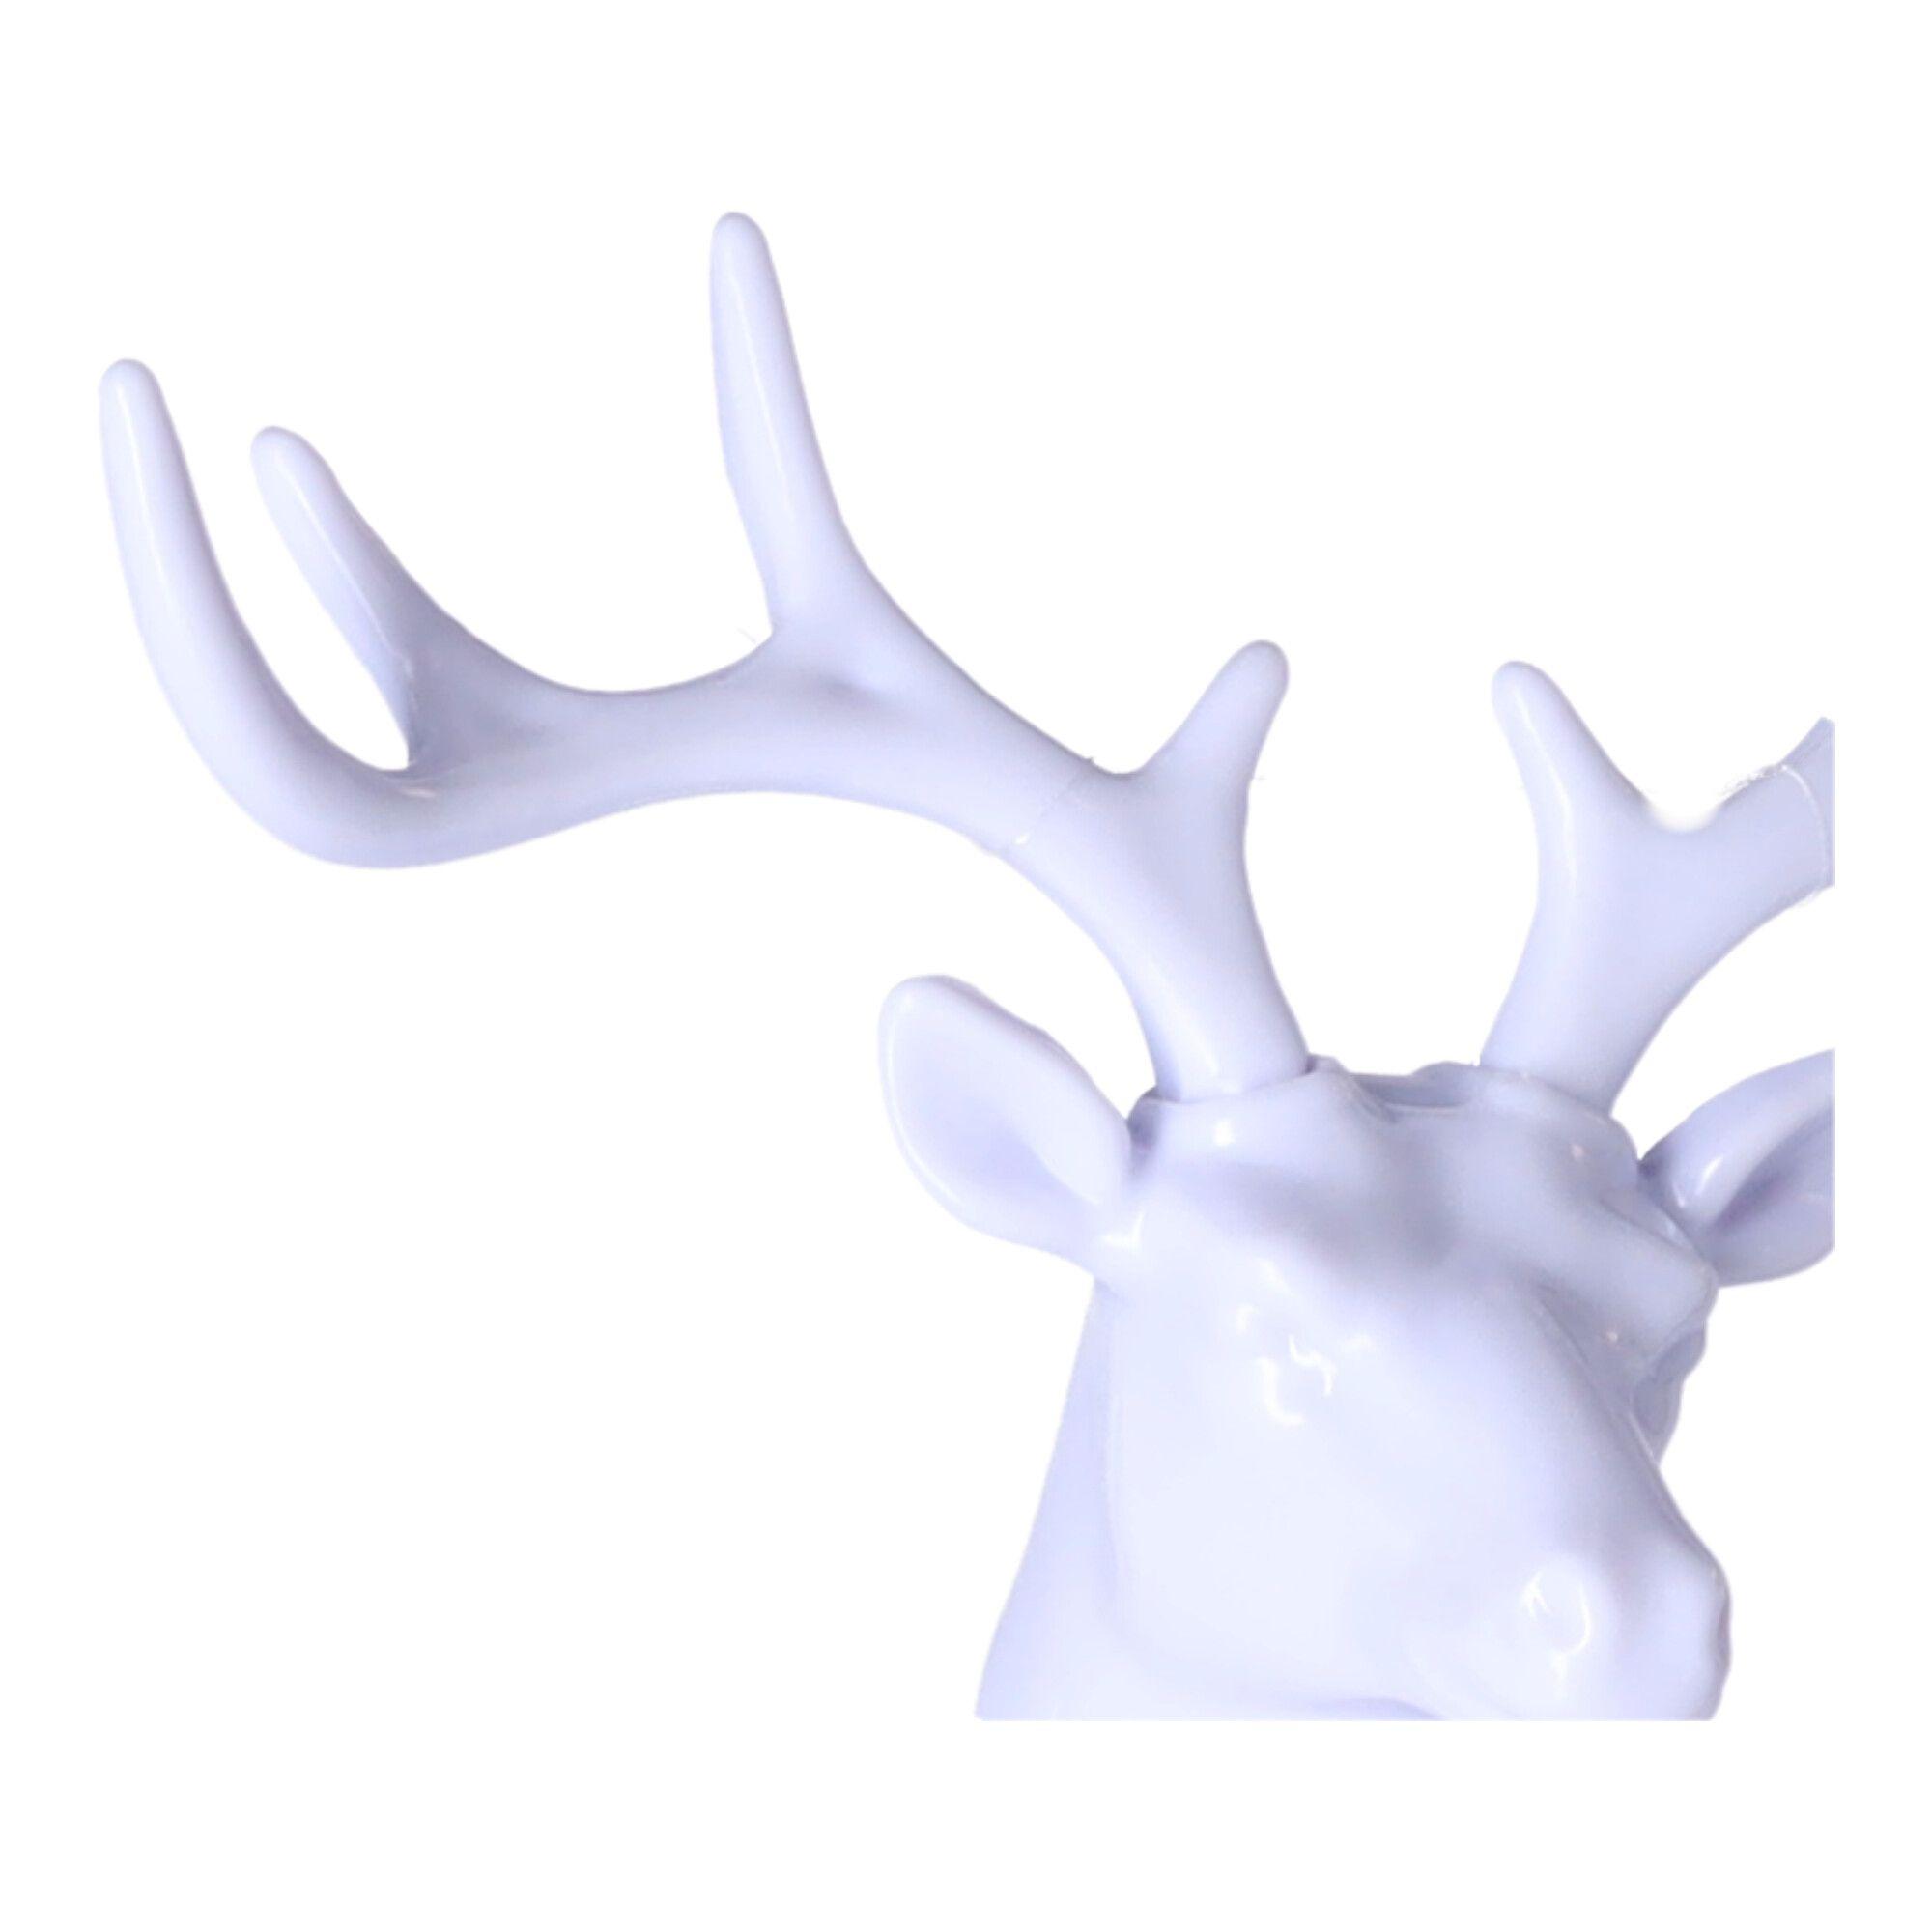 Antler wall hook in the form of a sticker - white